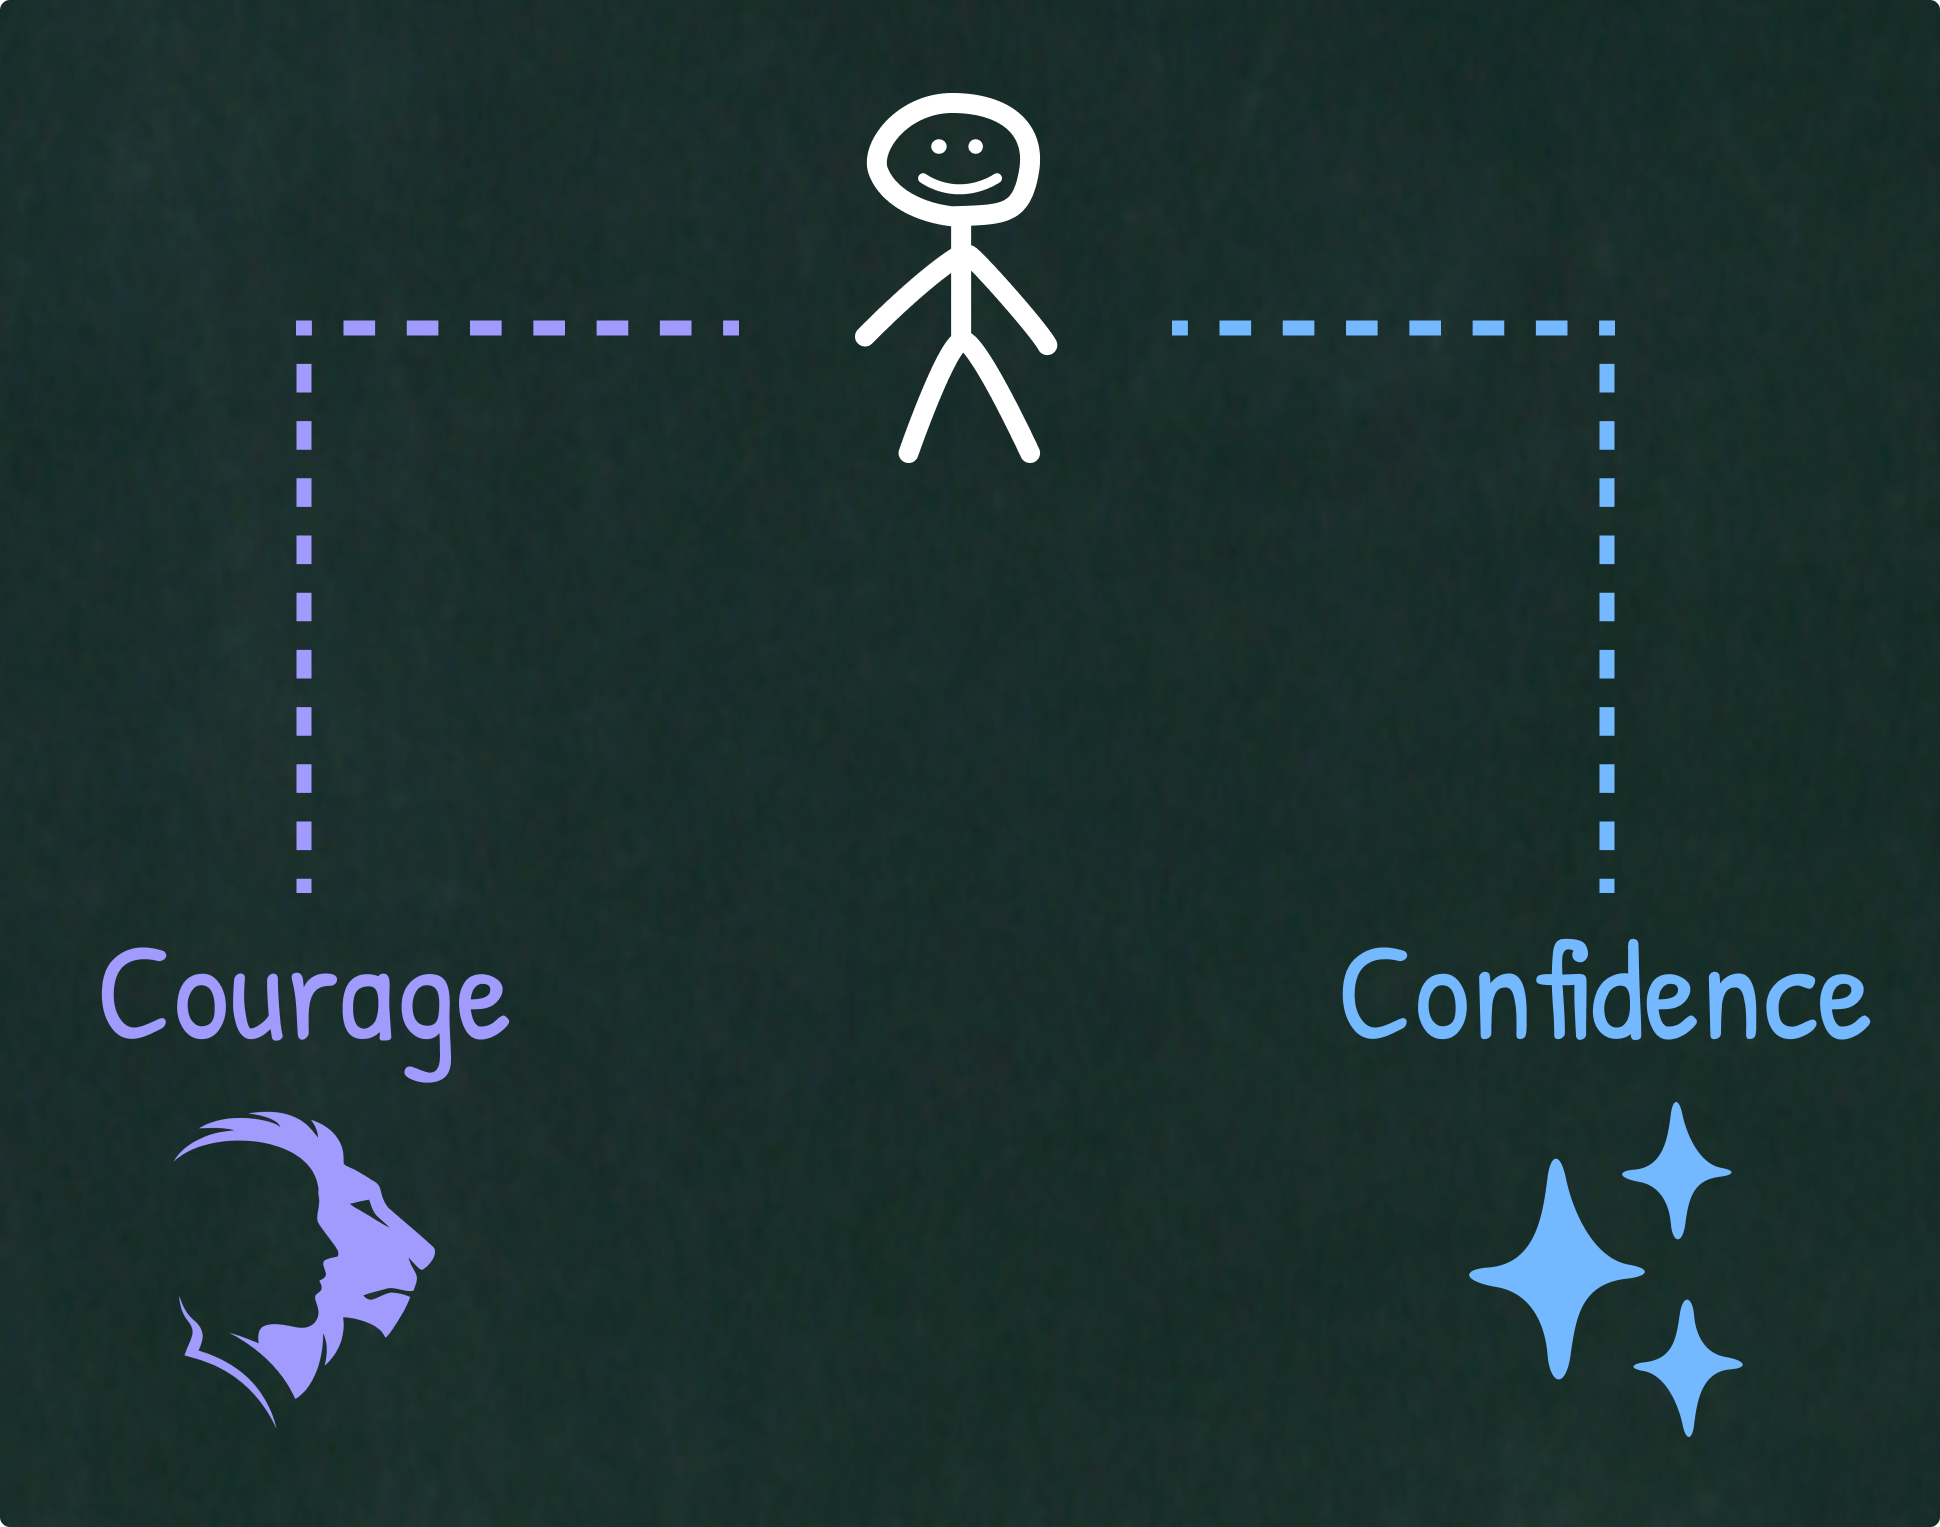 An individual with the willingness to develop both Courage and Confidence